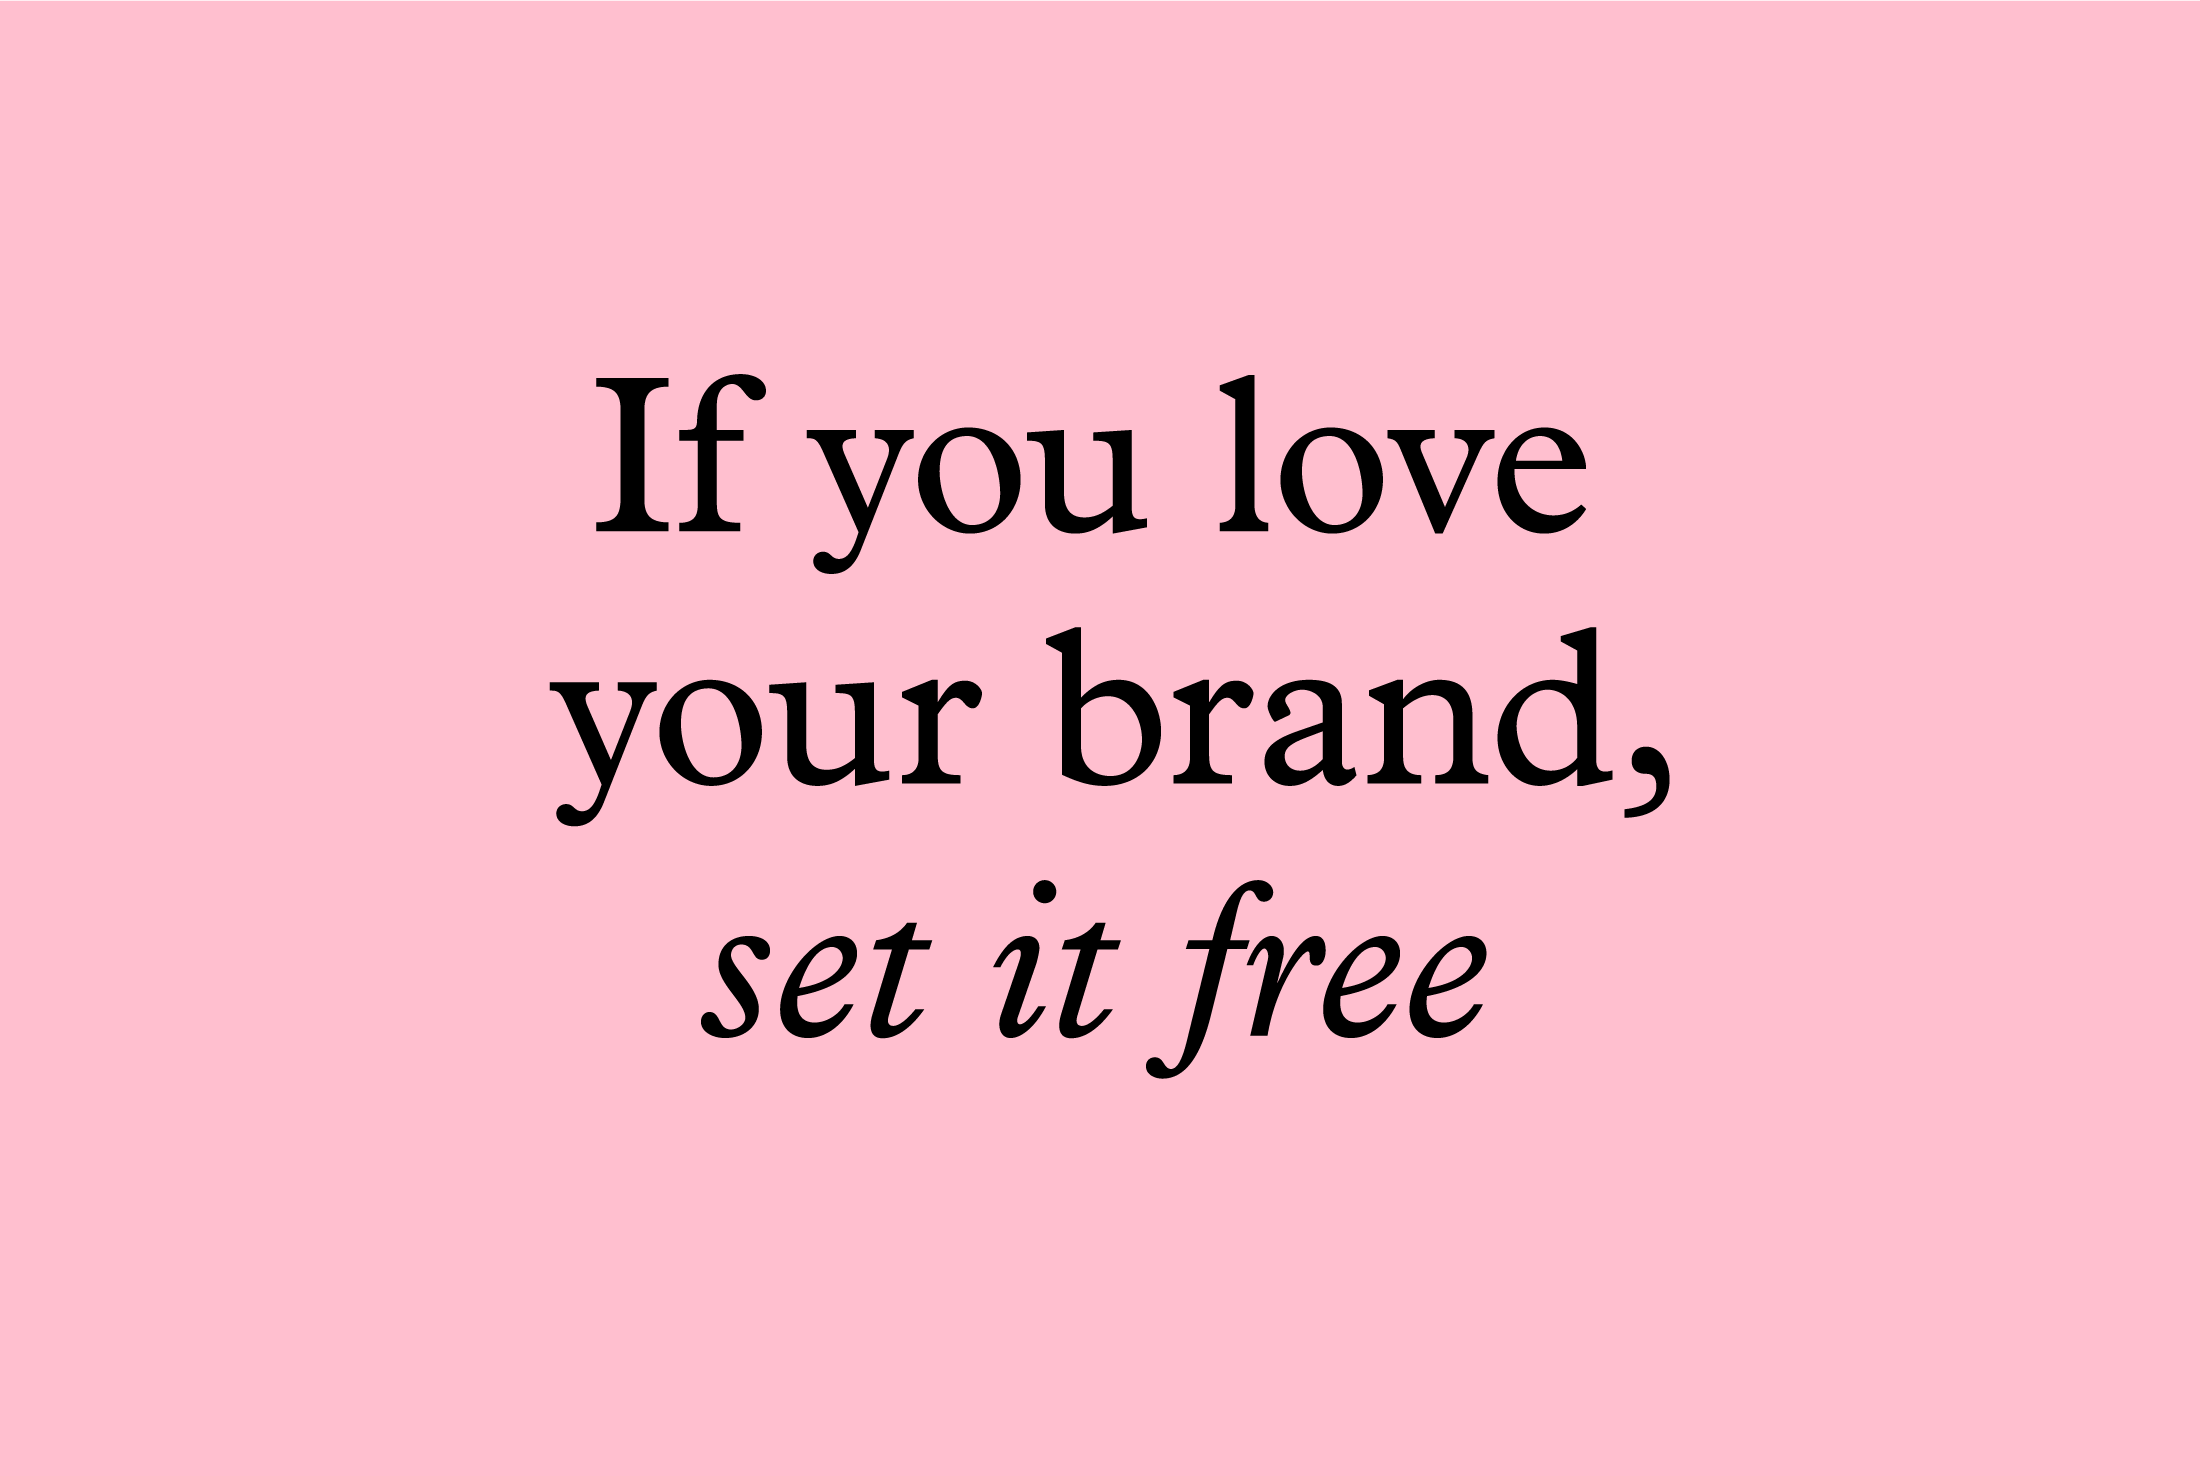 If you love your brand, set it free